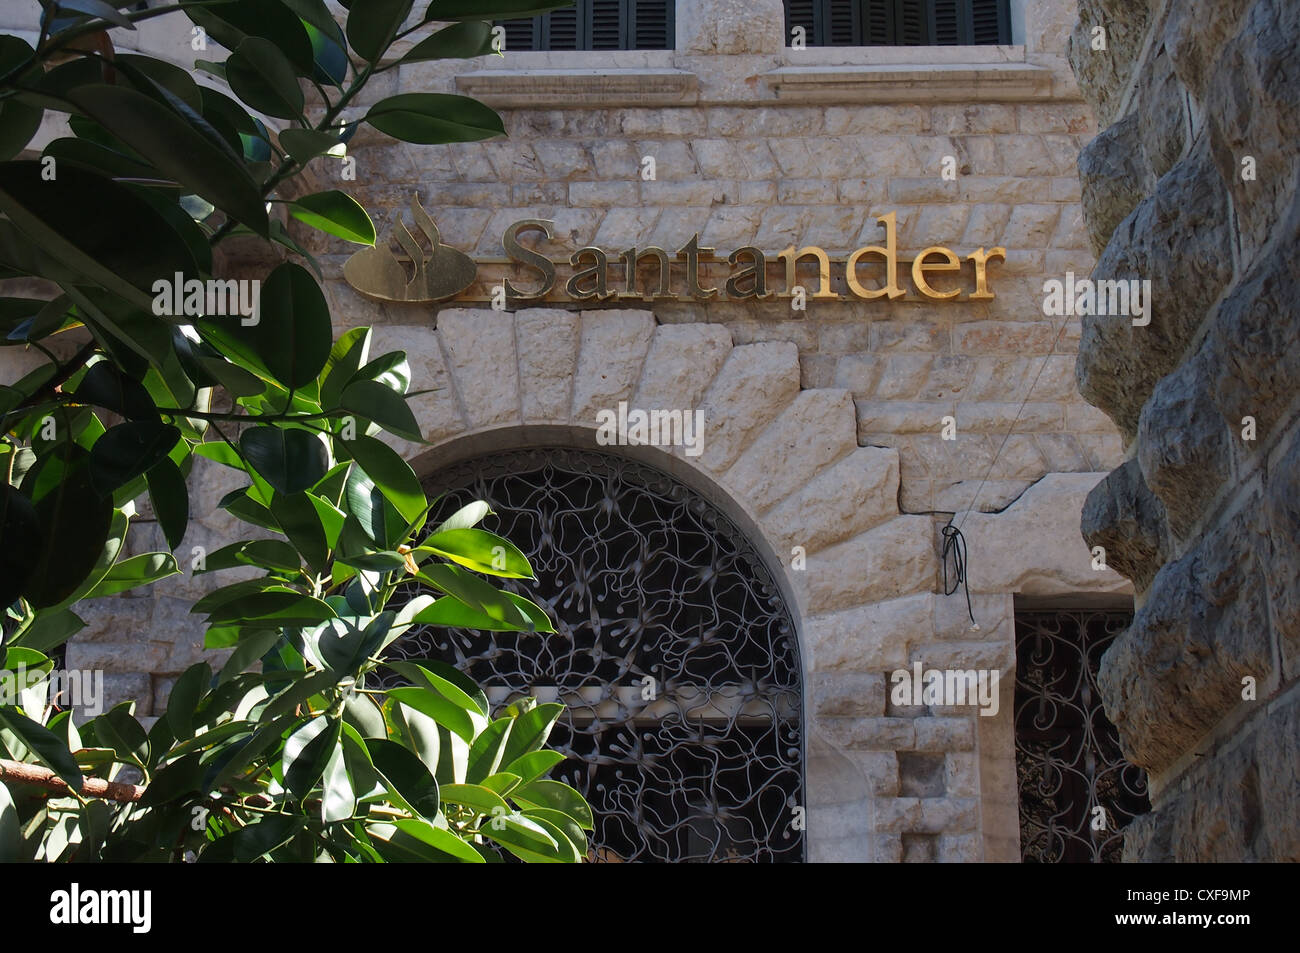 A branch of the Spanish bank Santander in Soller Mallorca Spain Stock Photo